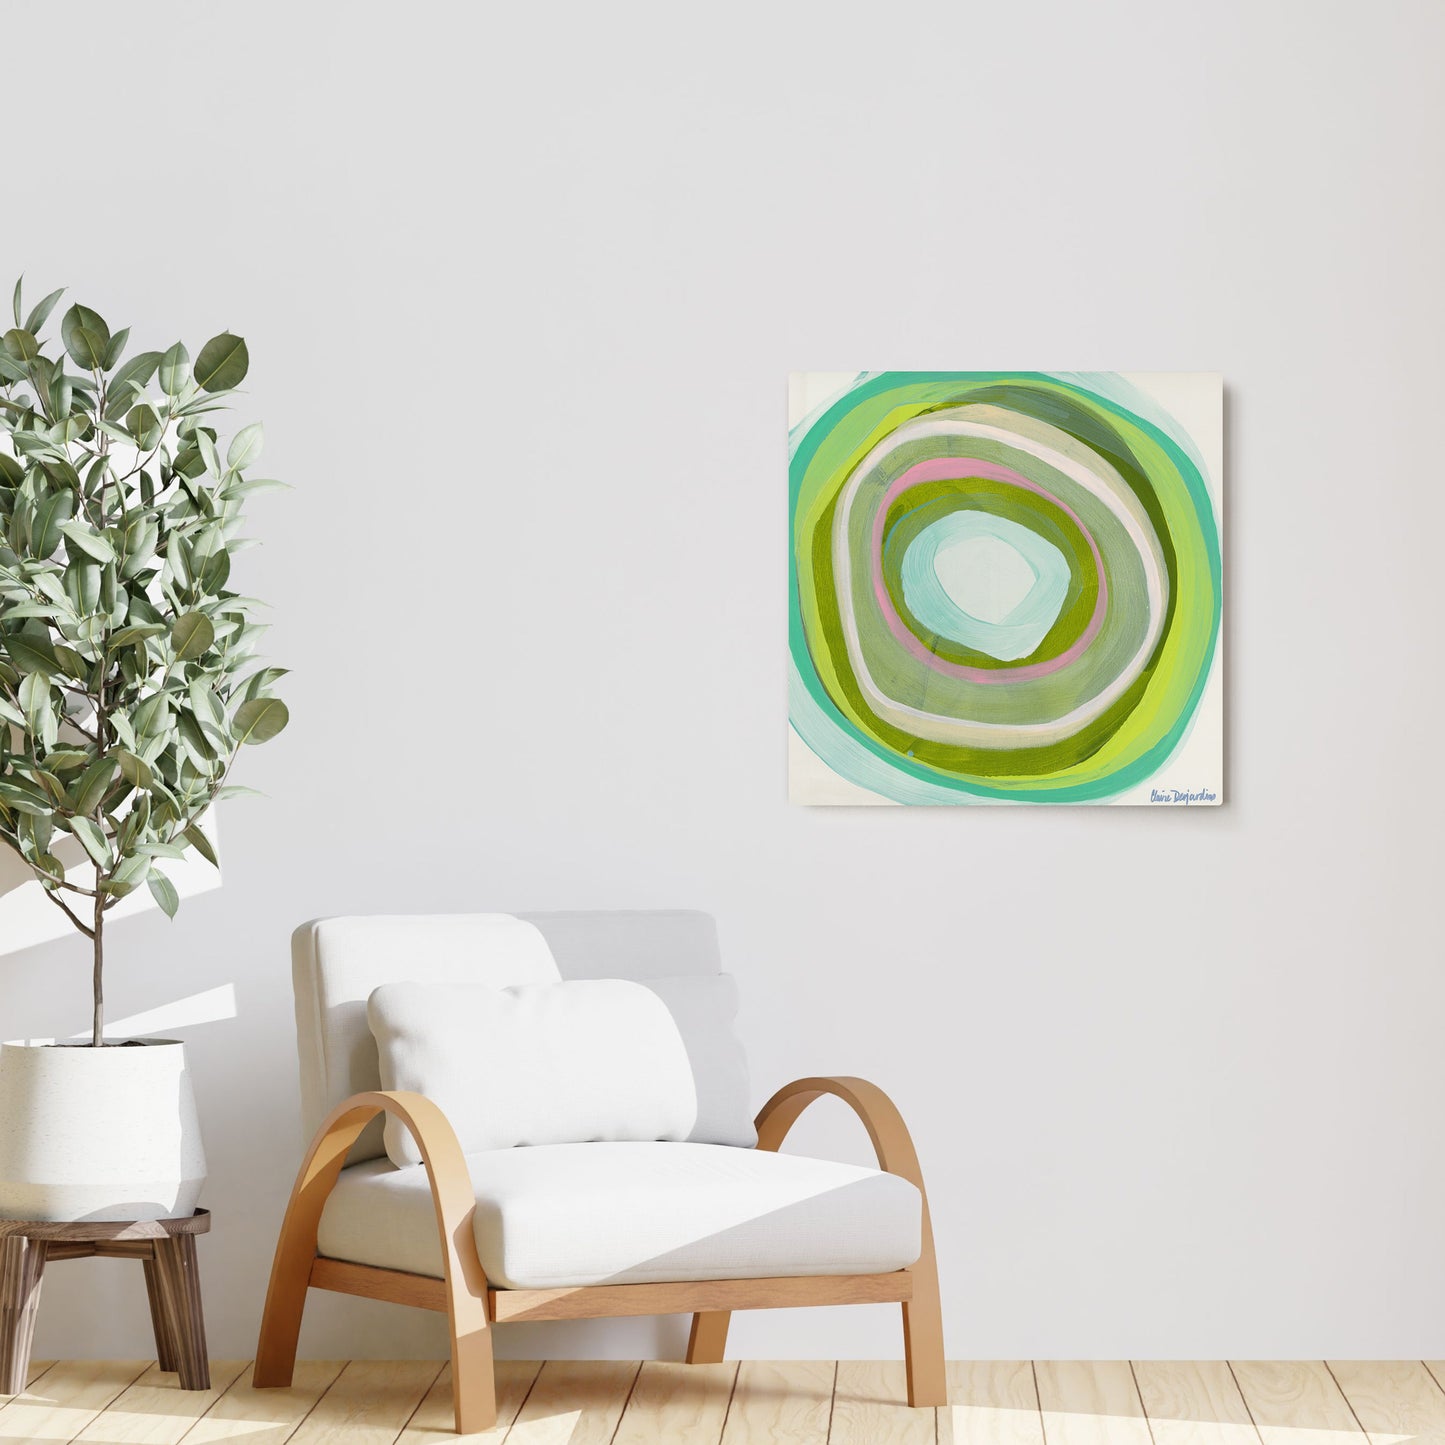 Claire Desjardins' All of the Colors Green painting reproduced on HD metal print and displayed on wall